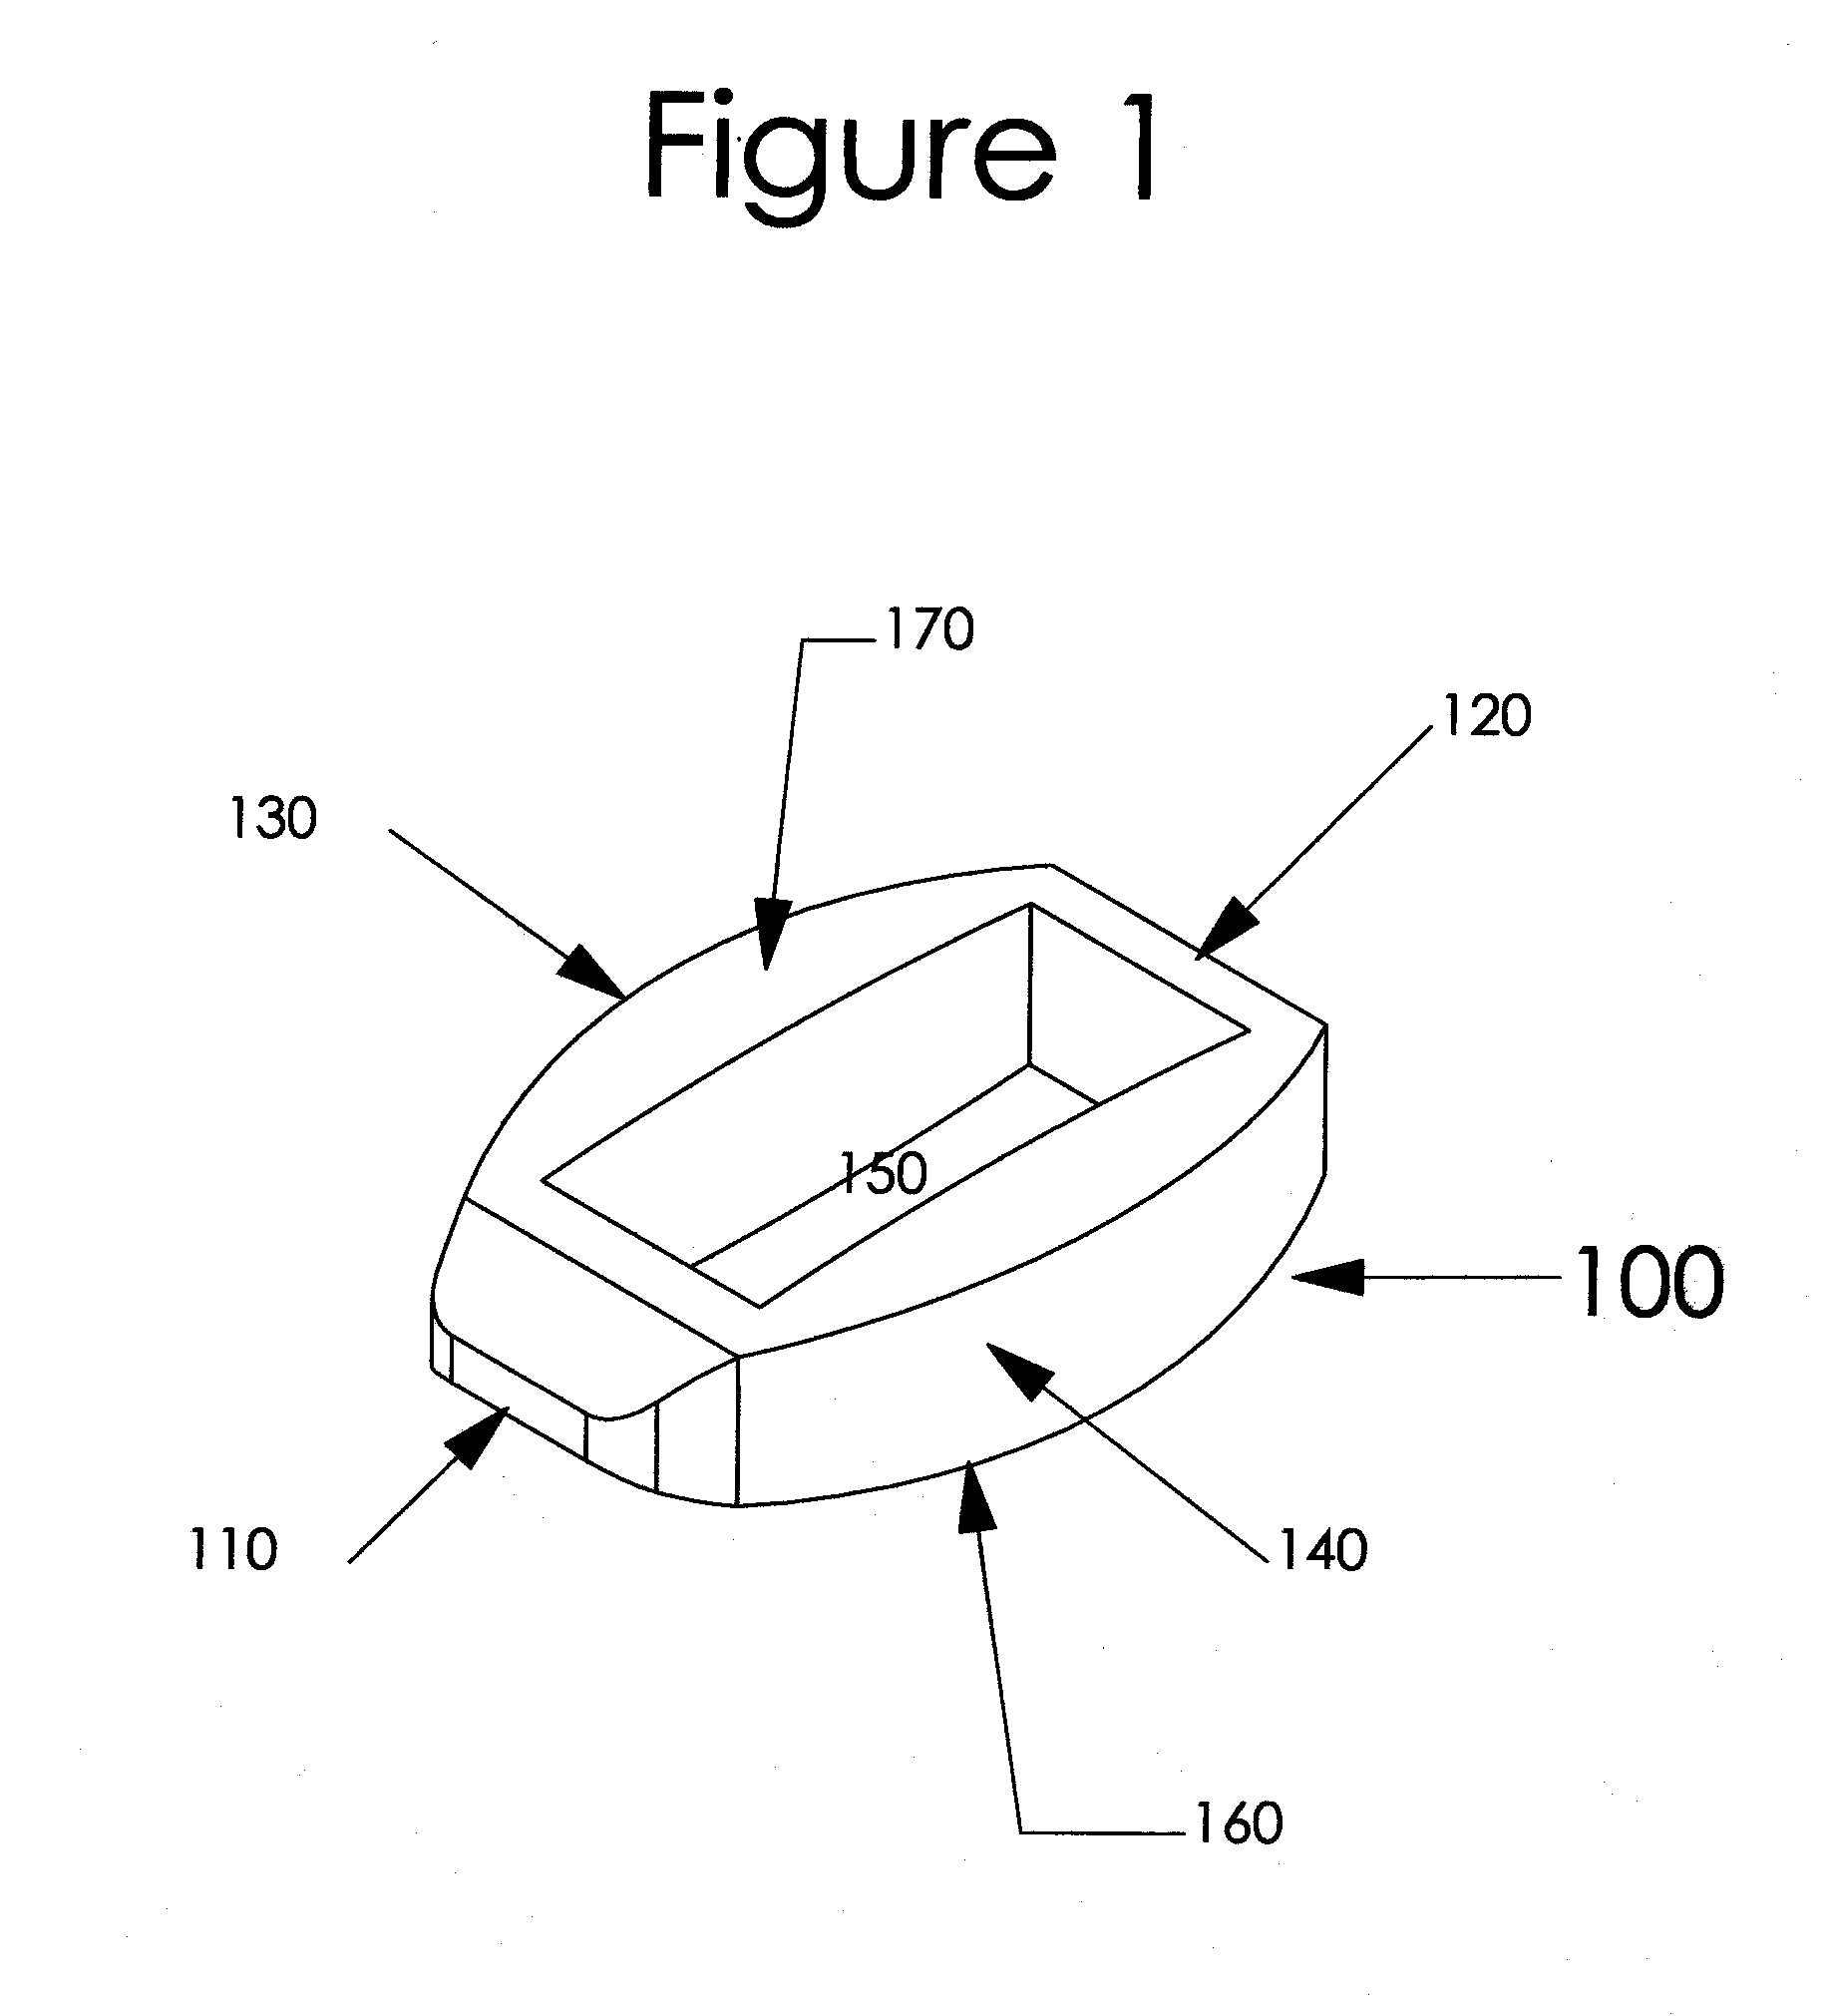 Intervertebral spinal implant, installation device and system